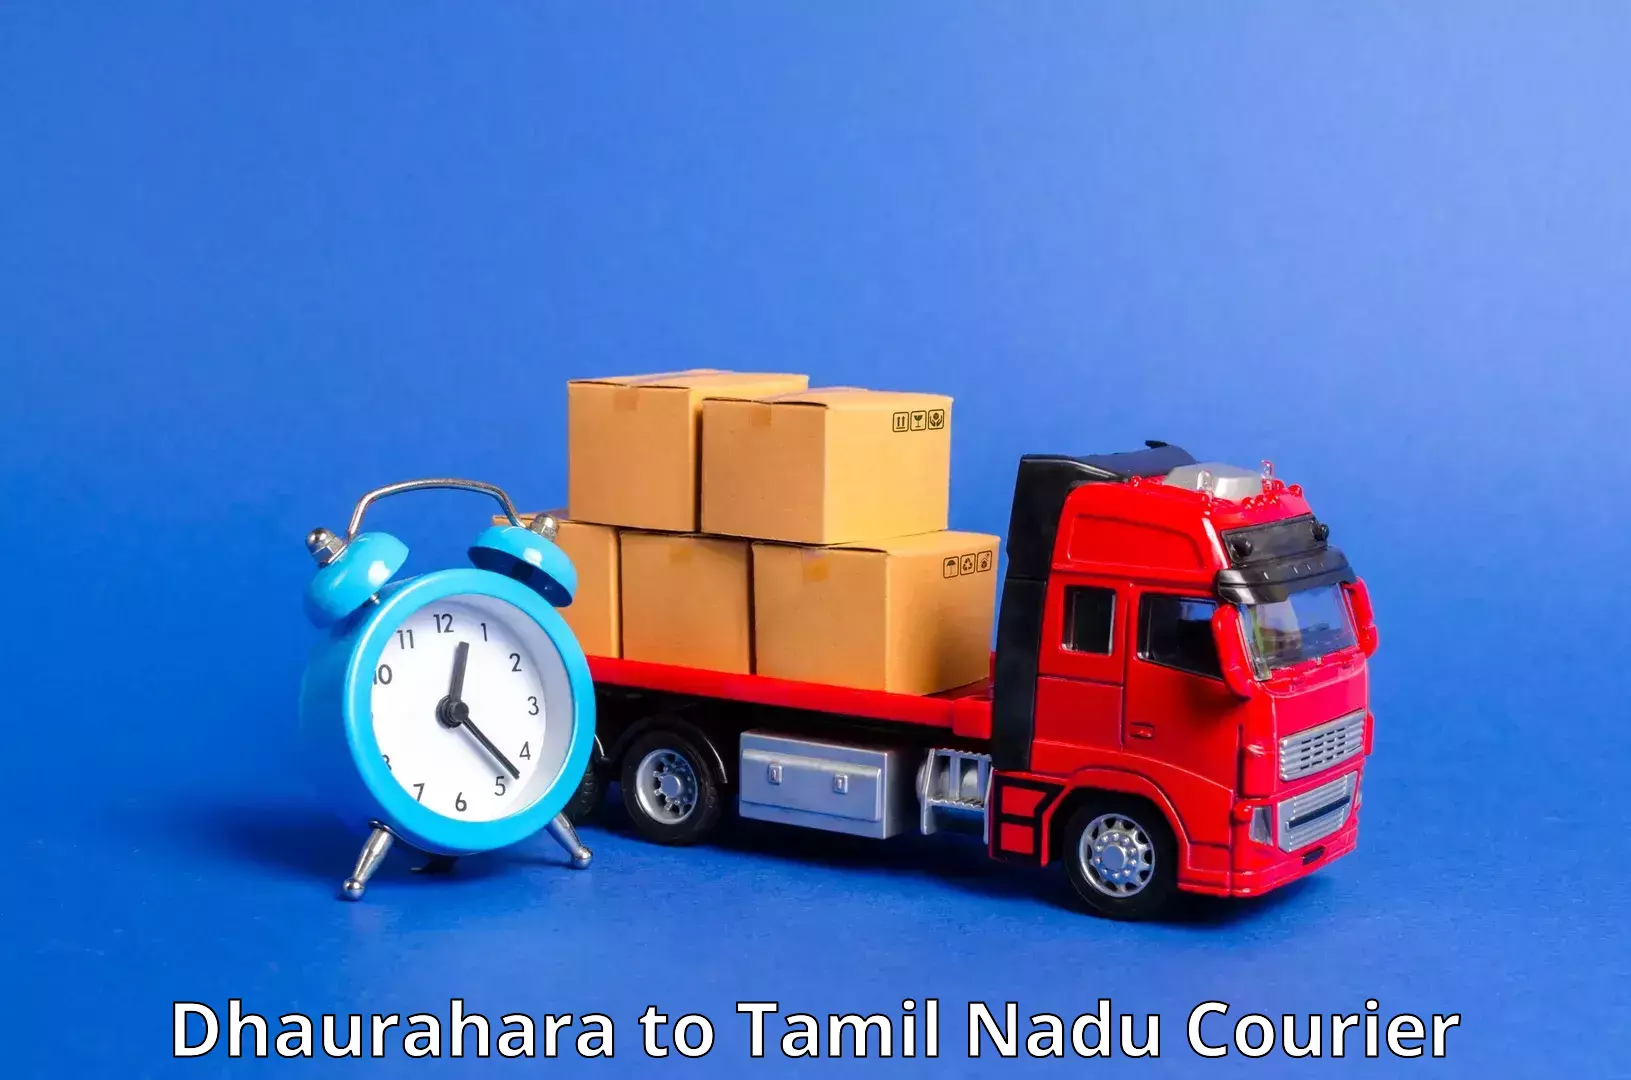 Budget-friendly shipping Dhaurahara to SRM Institute of Science and Technology Chennai